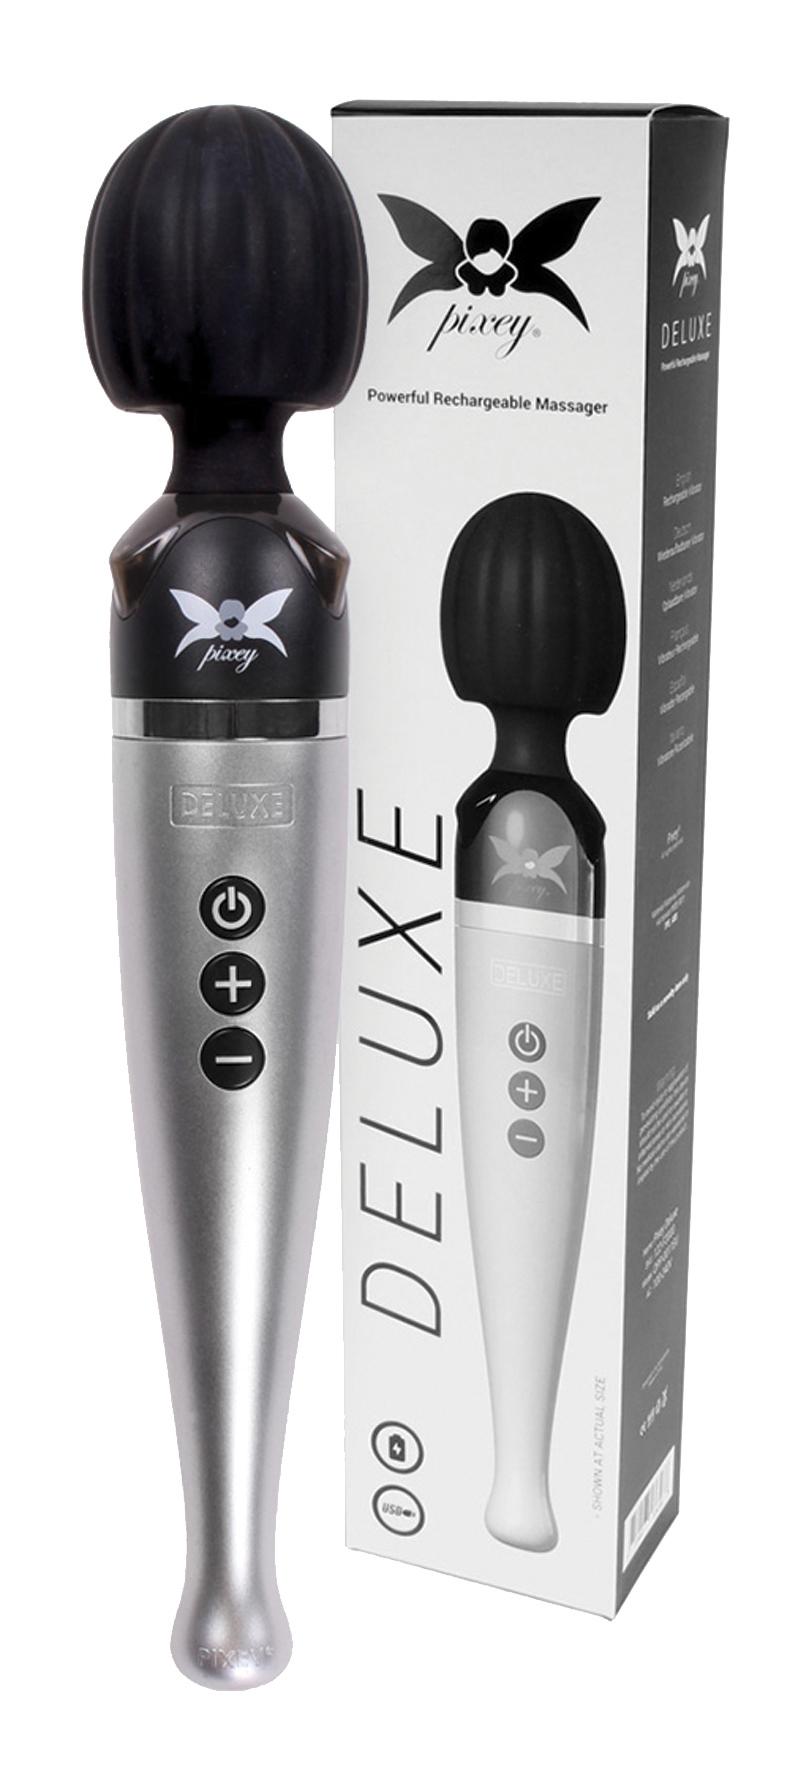 Pixey Deluxe Powerful Wand Massager, Silver/Black, 33 cm